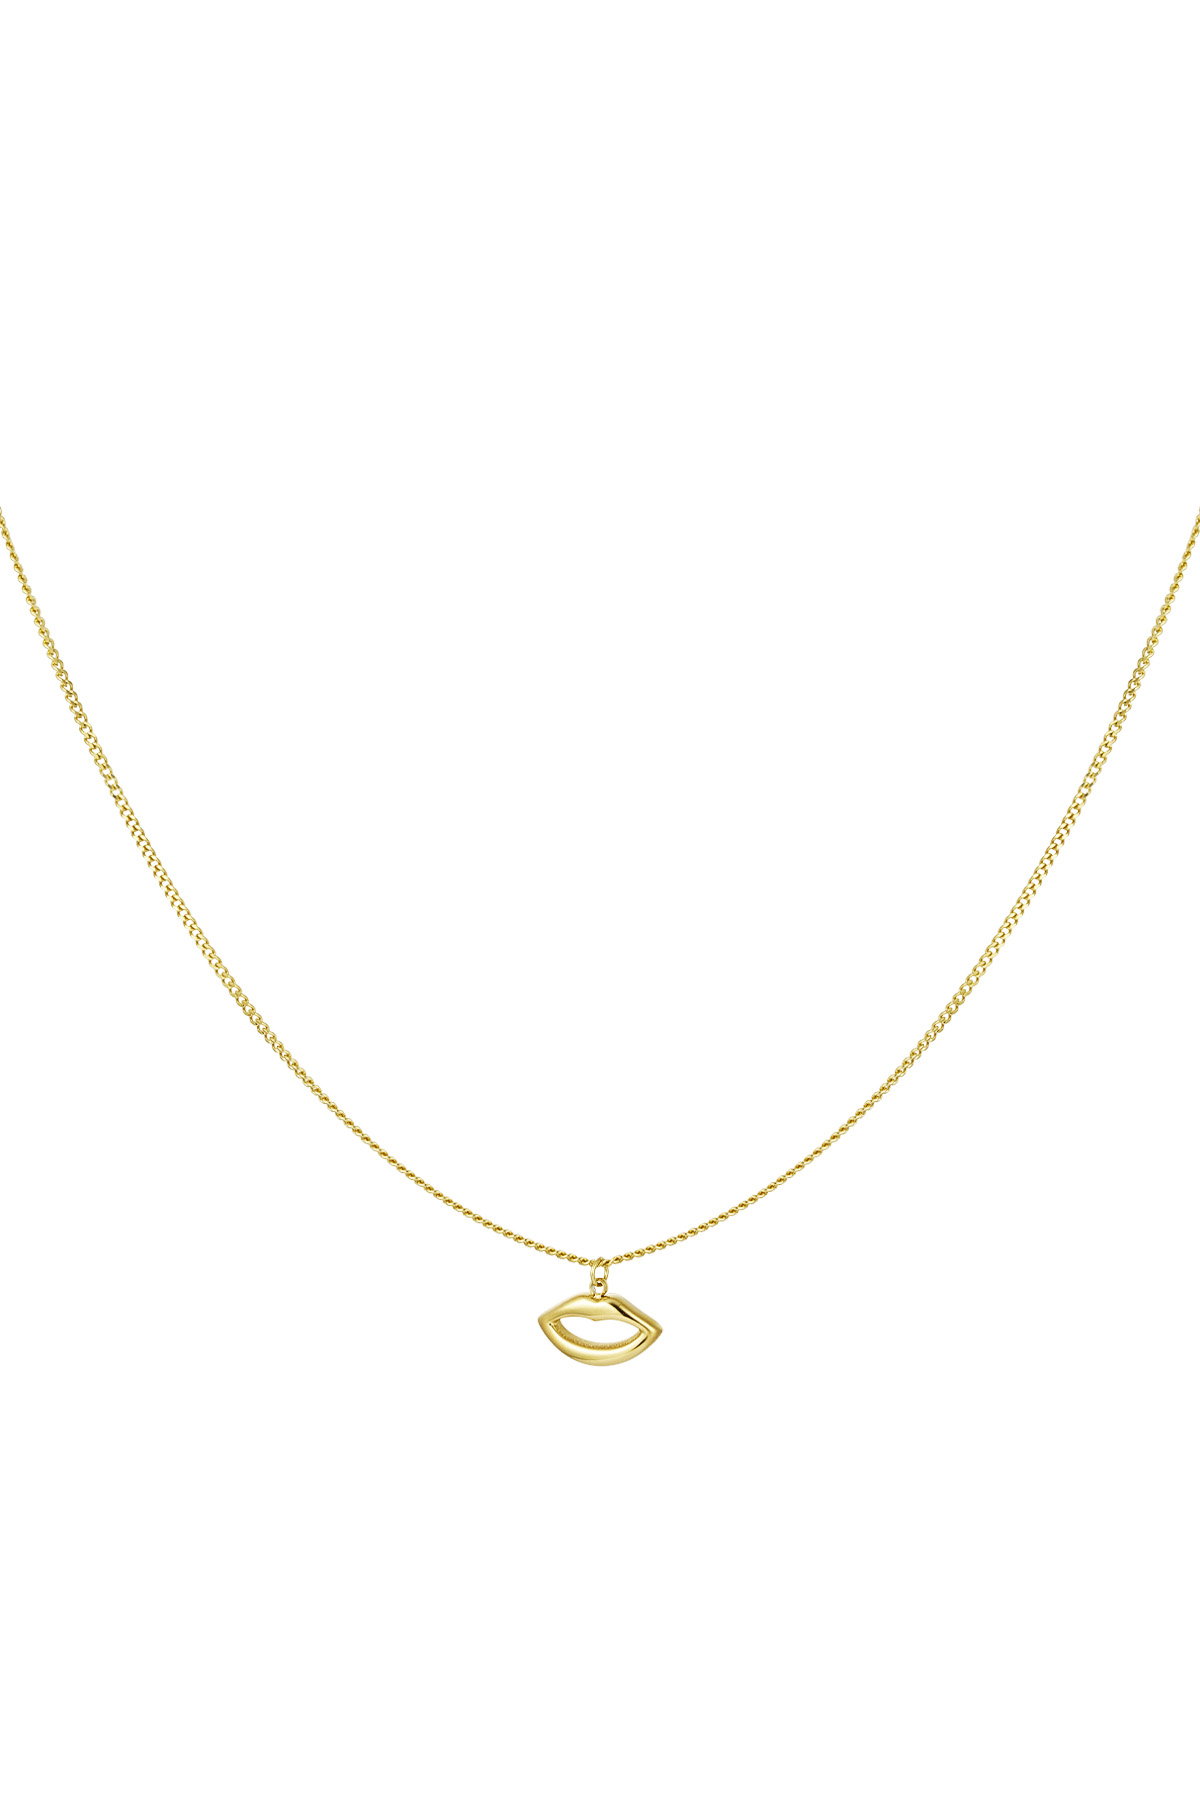 Simple necklace with lips charm - gold 